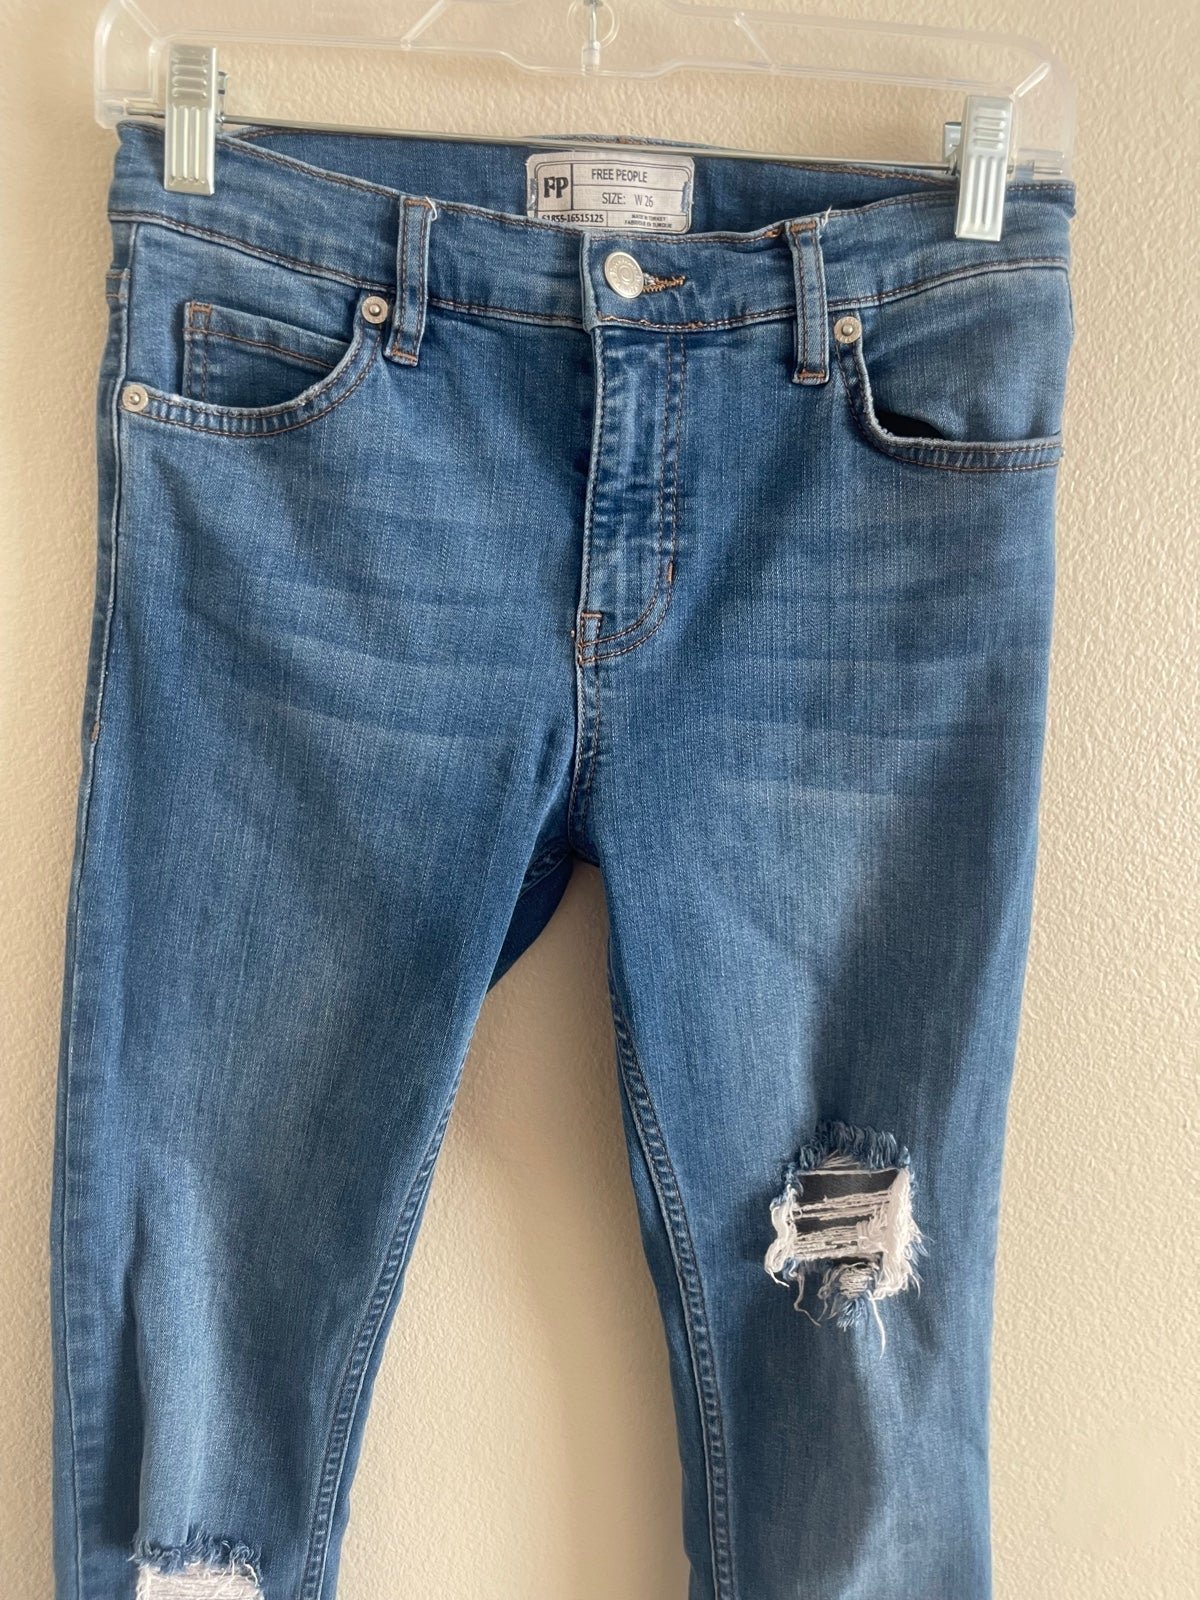 Wholesale price Free People Womens Medium Wash Distressed Skinny Jeans size 26 H8kF1T38X New Style